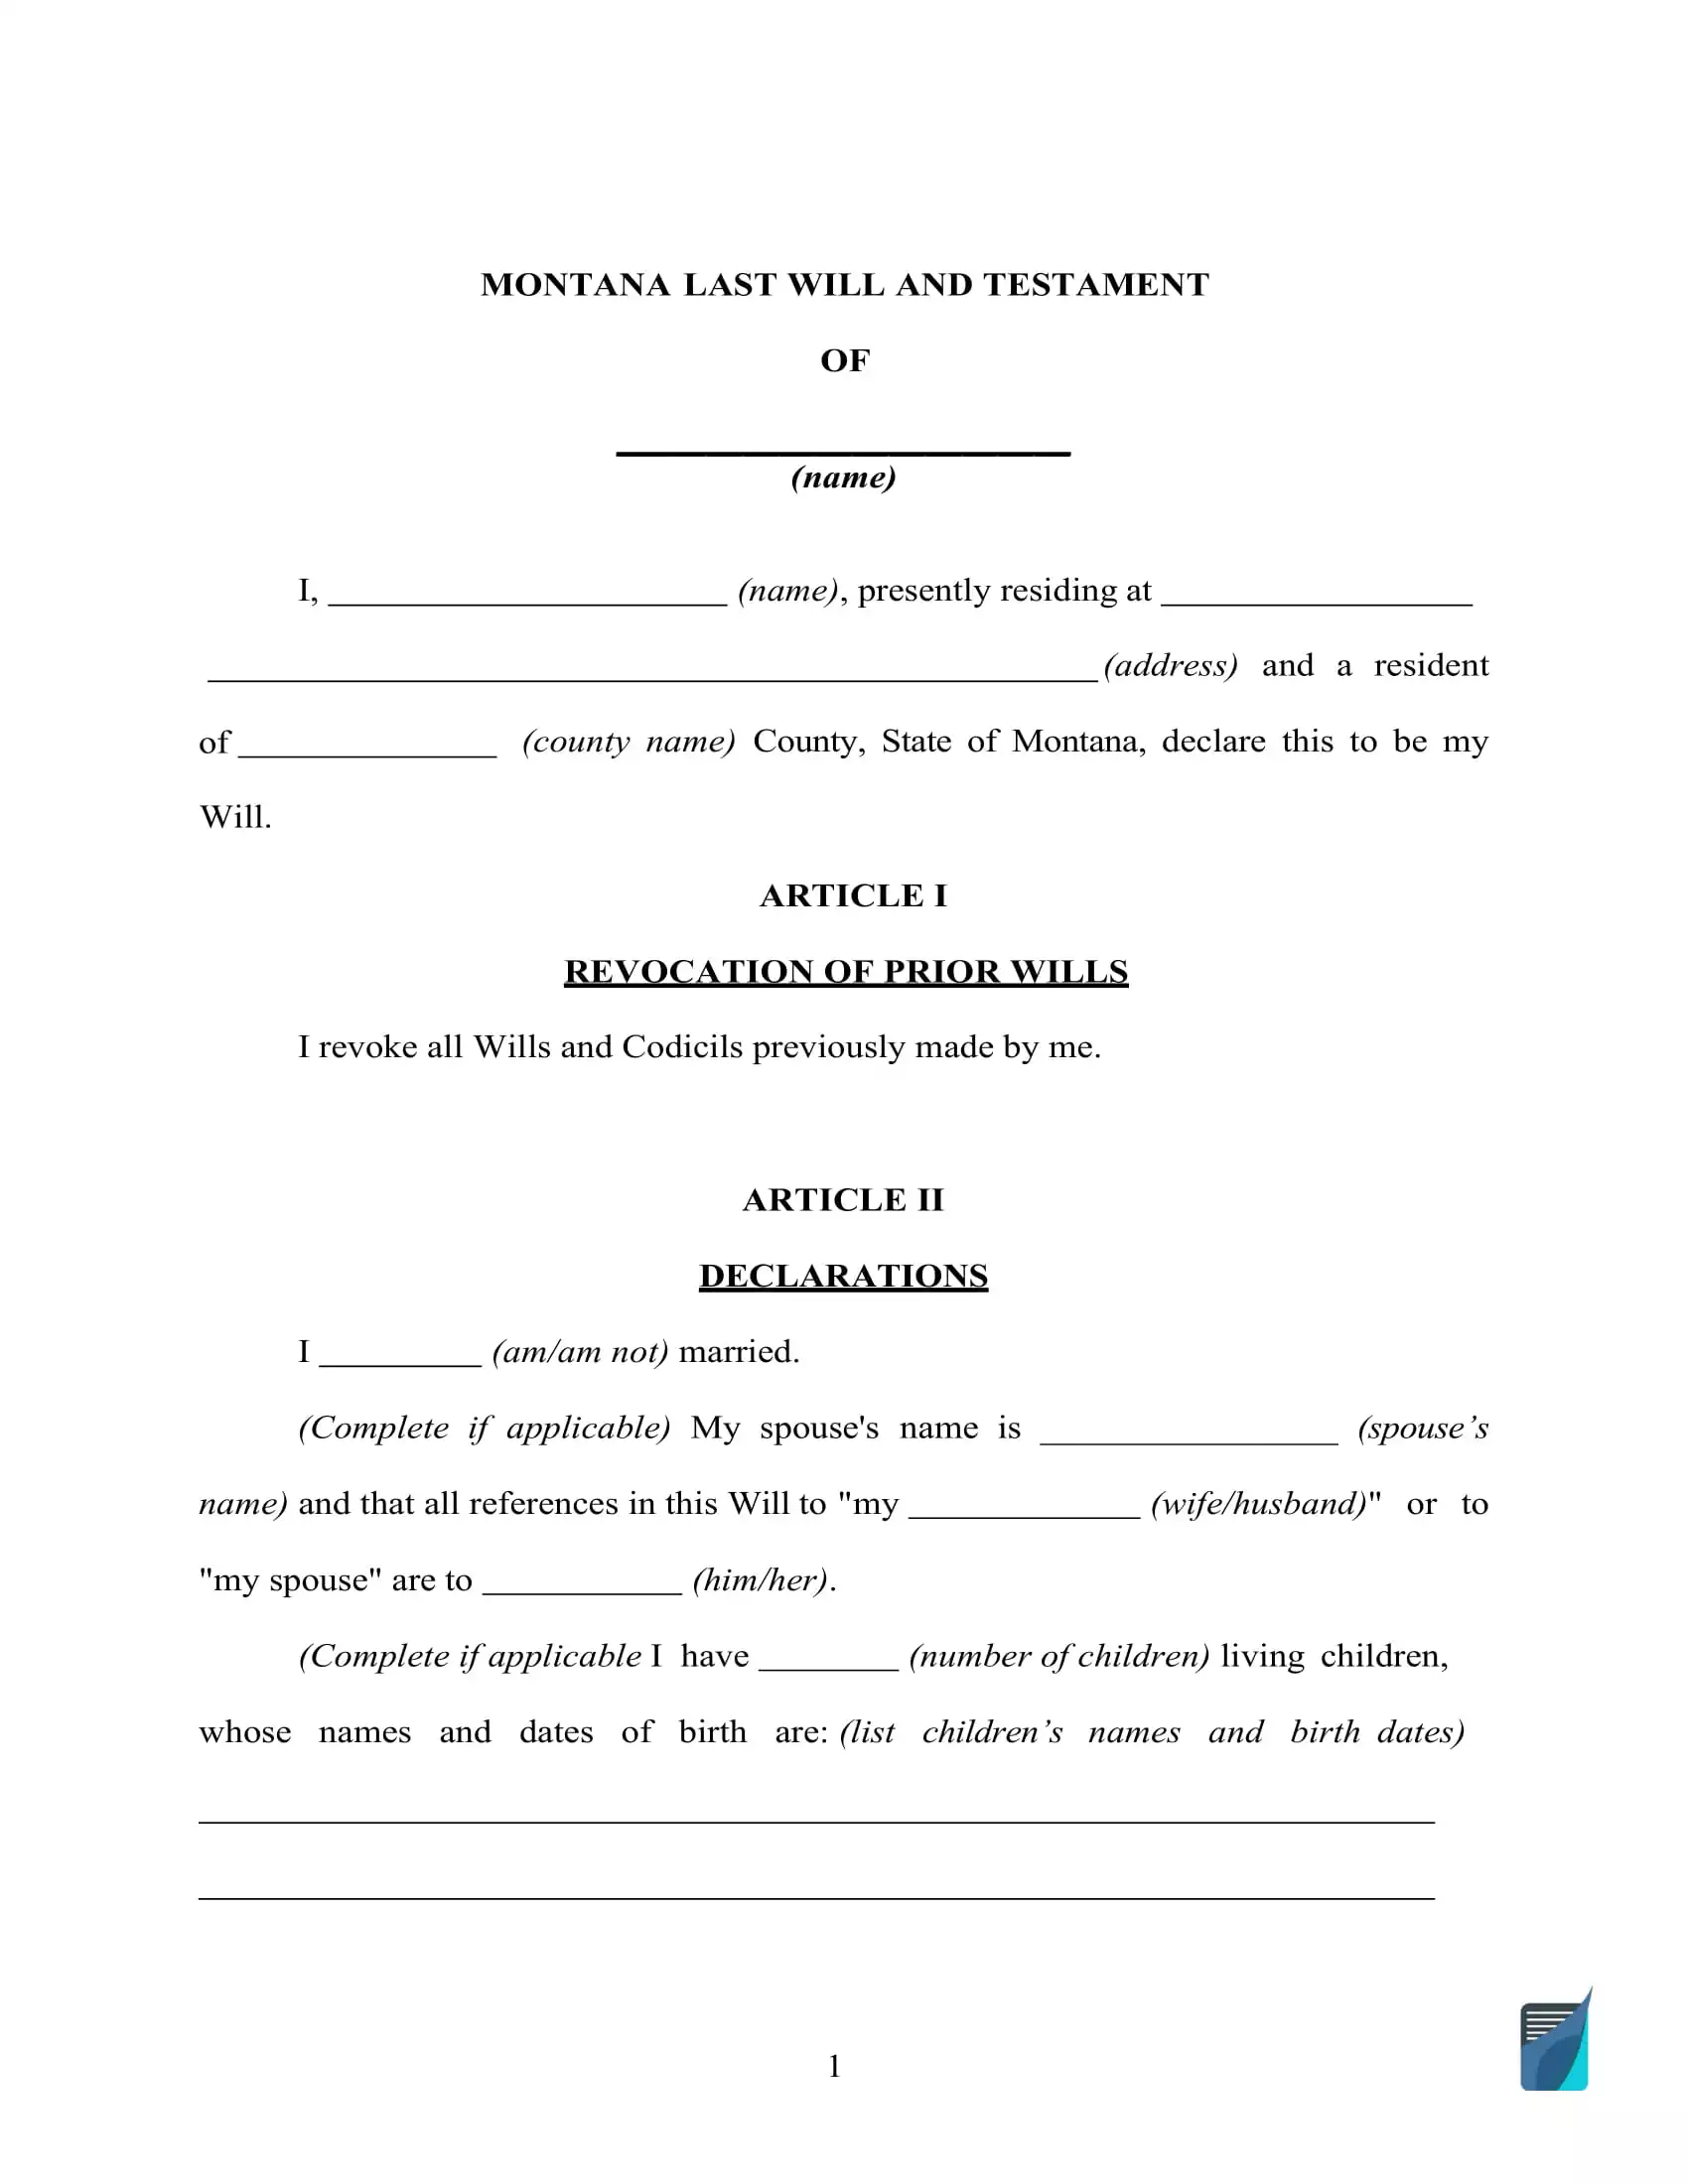 montana-last-will-and-testament-template